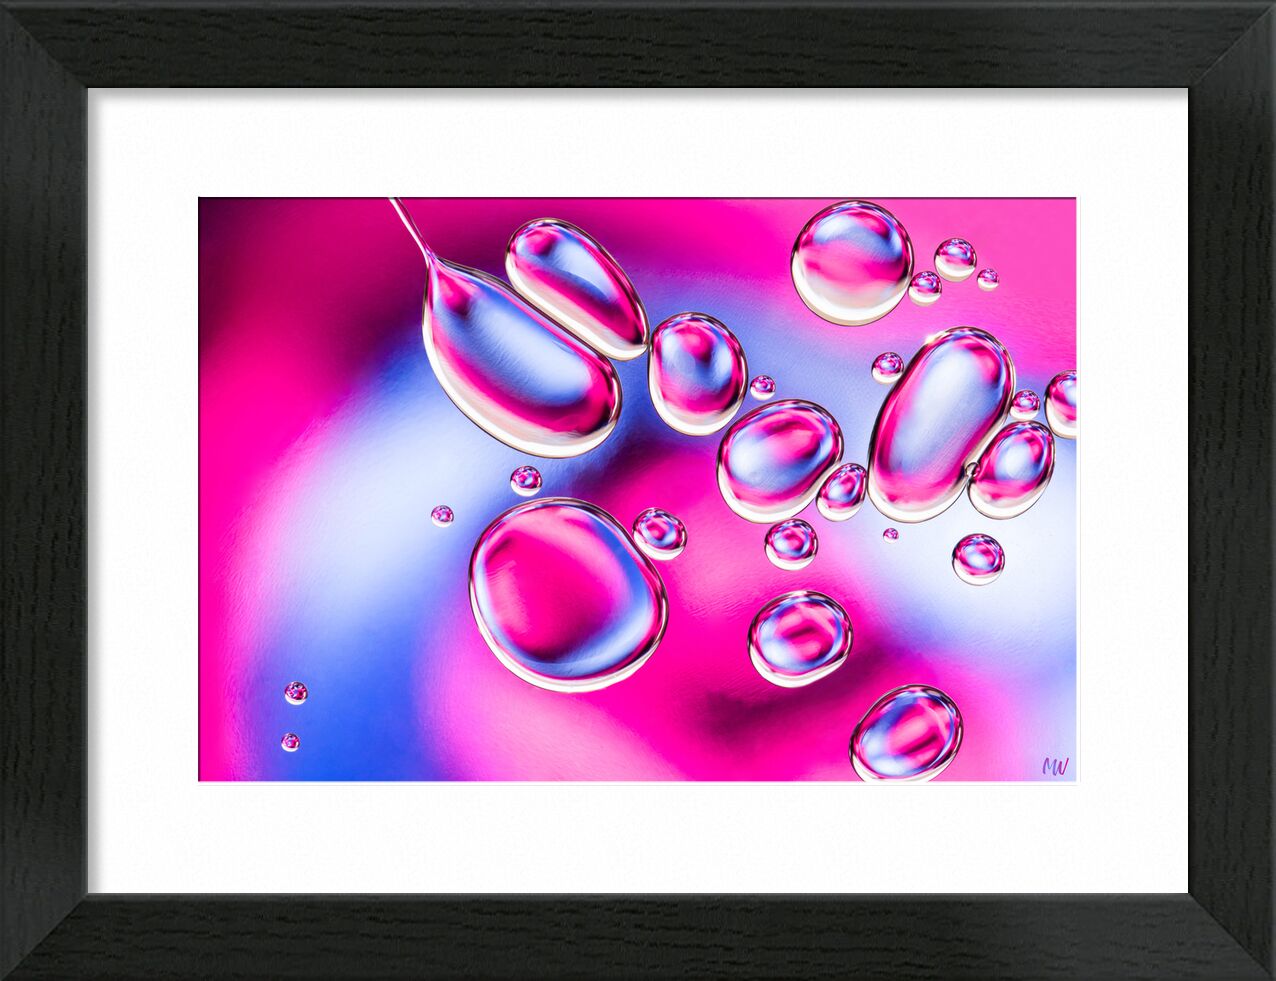 Oily bubbles #2 from Mickaël Weber, Prodi Art, goutelettes, droplets, drops, bubbles, Bulles, color, blue, pink, abstract, macro, huile, oil, oily, fun, formes, shapes, water, modern, abstracr